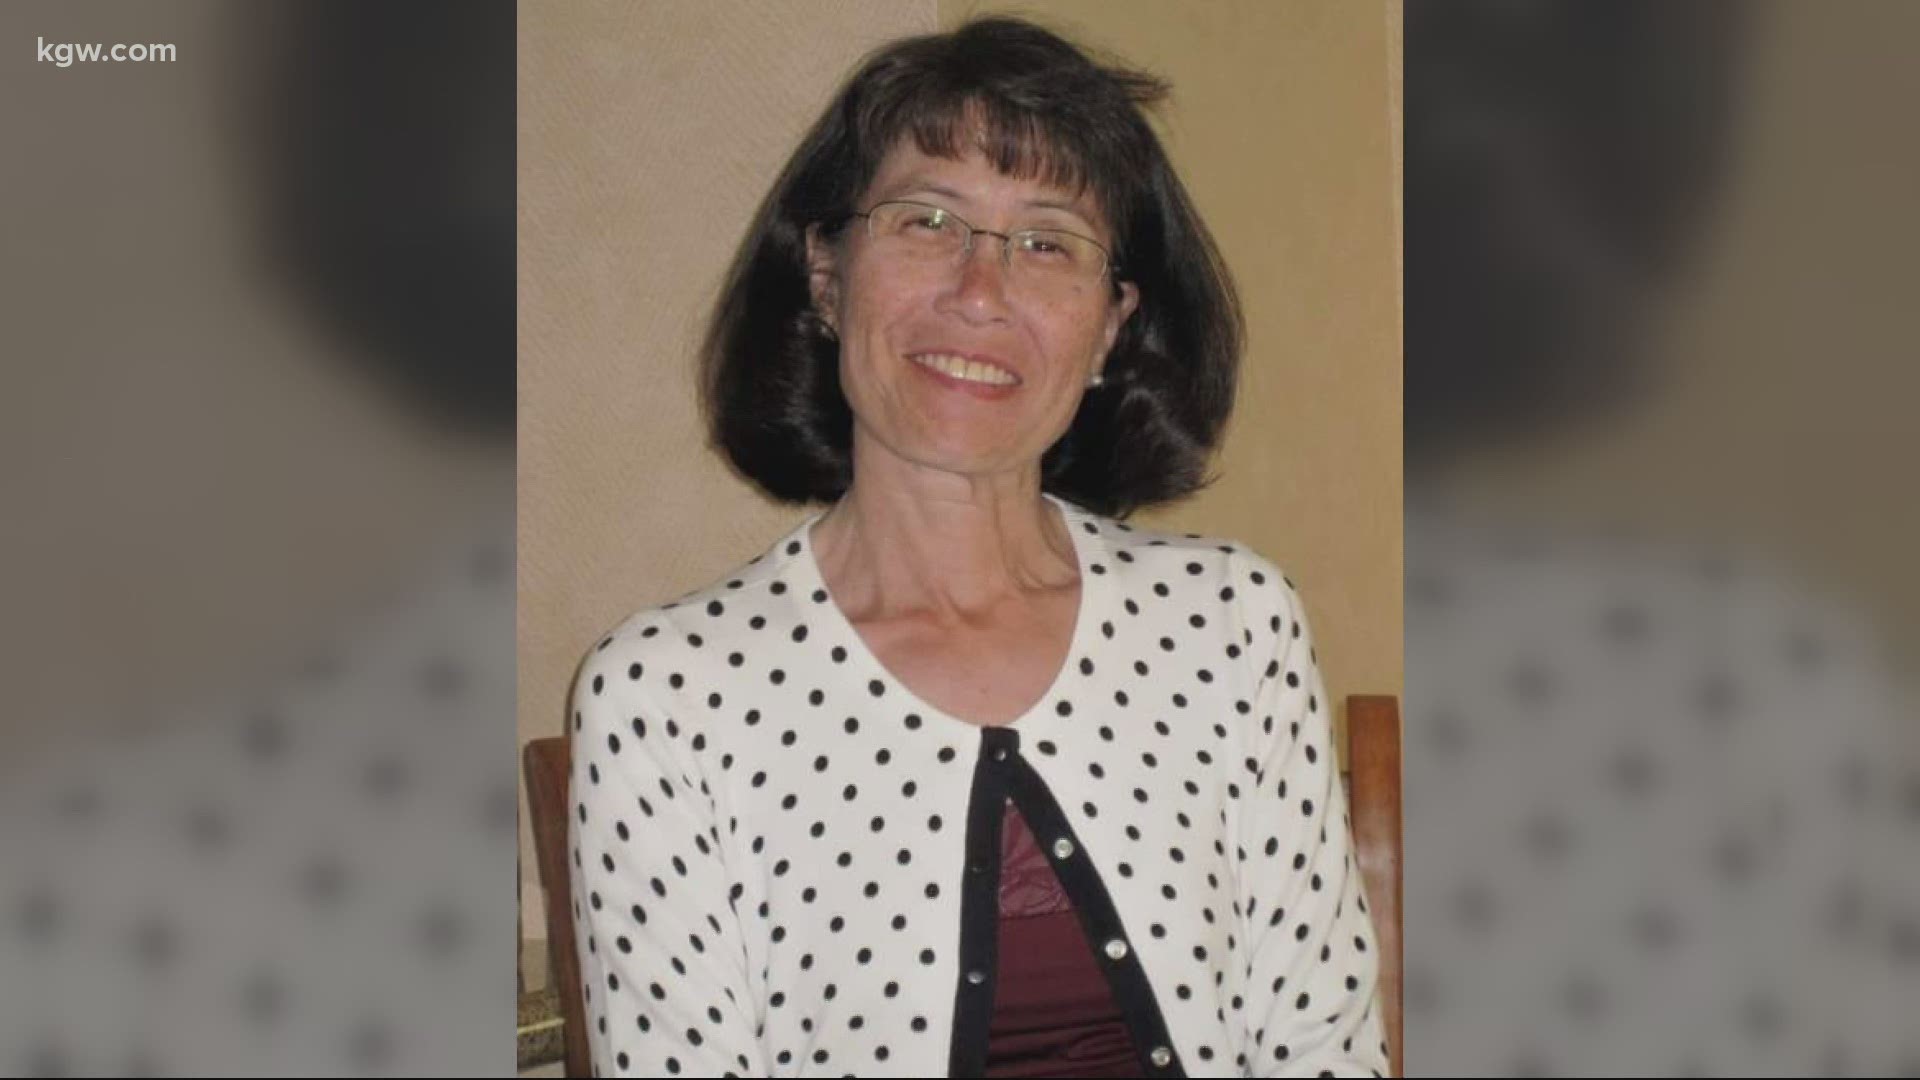 Selma Pierce, community leader and wife of 2016 Republican gubernatorial candidate Bud Pierce, died Tuesday night after she was hit by an SUV in West Salem.